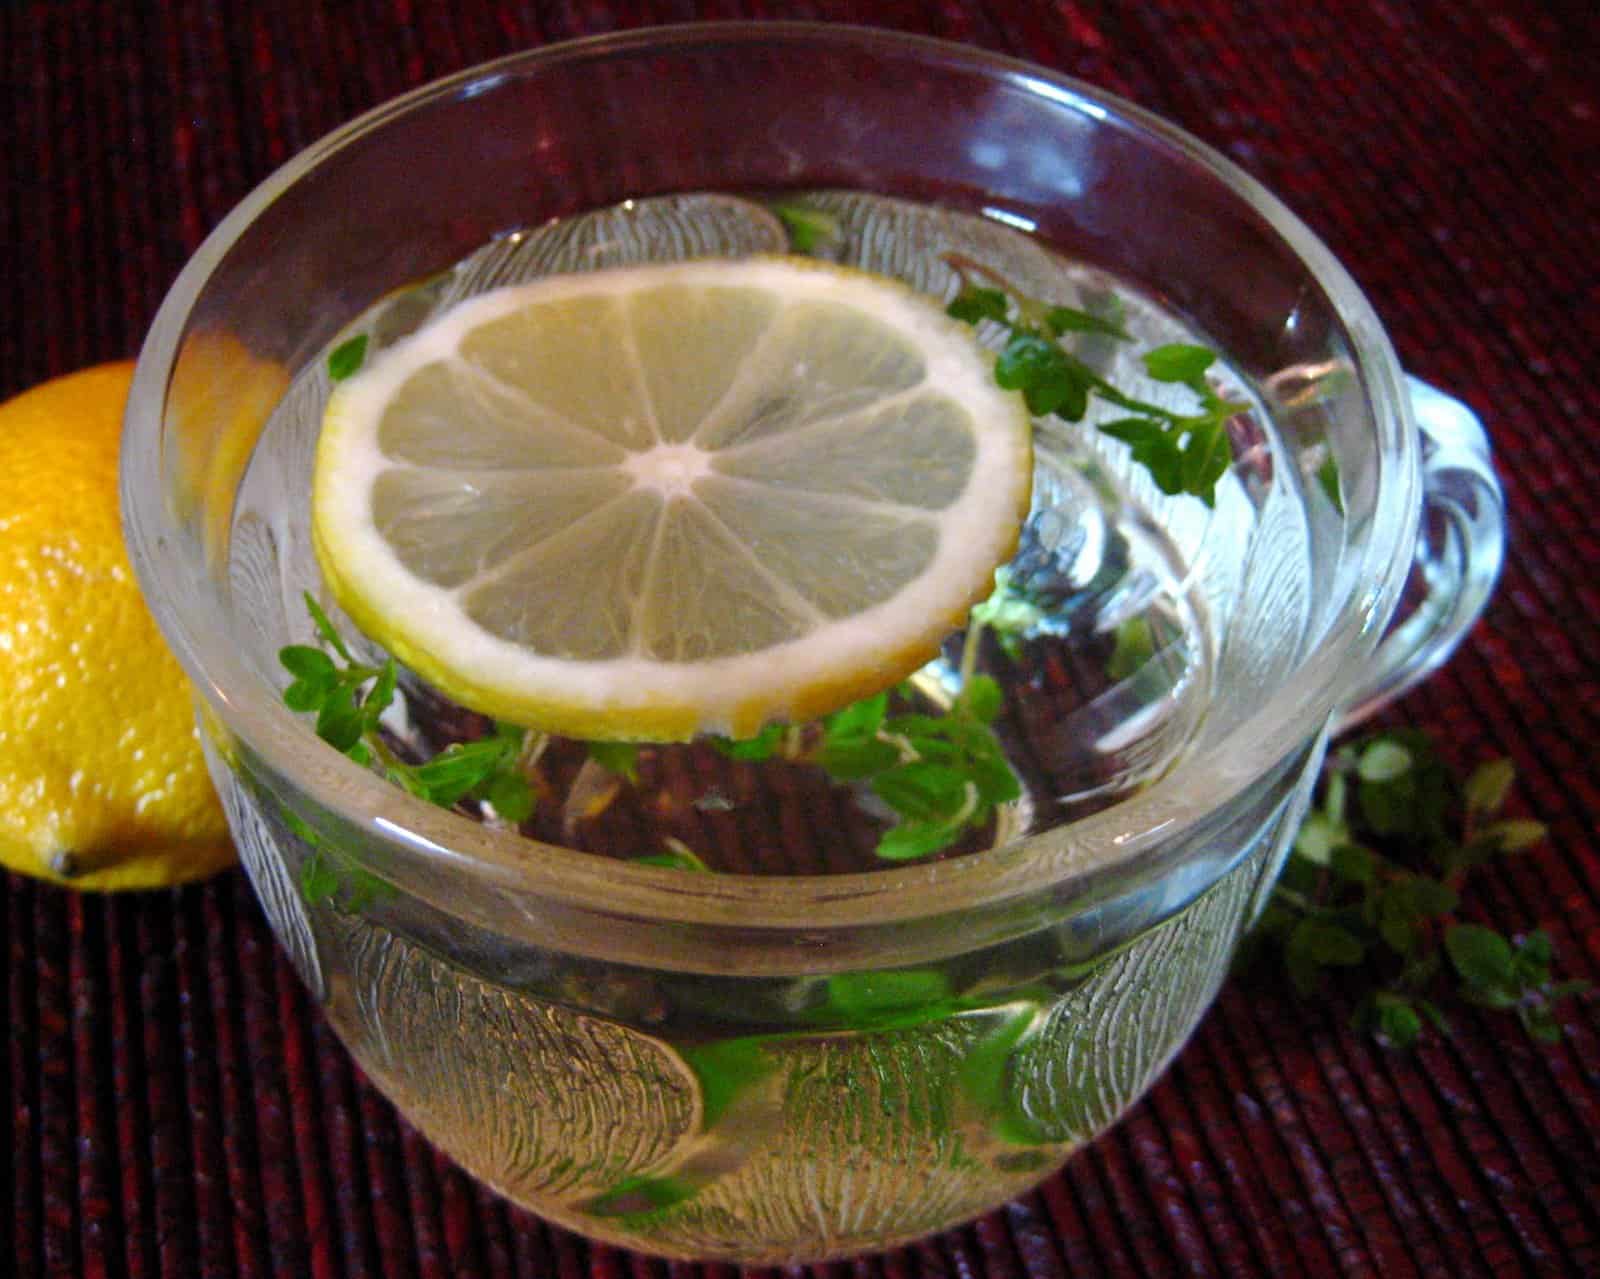 Lemon Thyme Lift Tea in a glass cup with a lemon slice on top